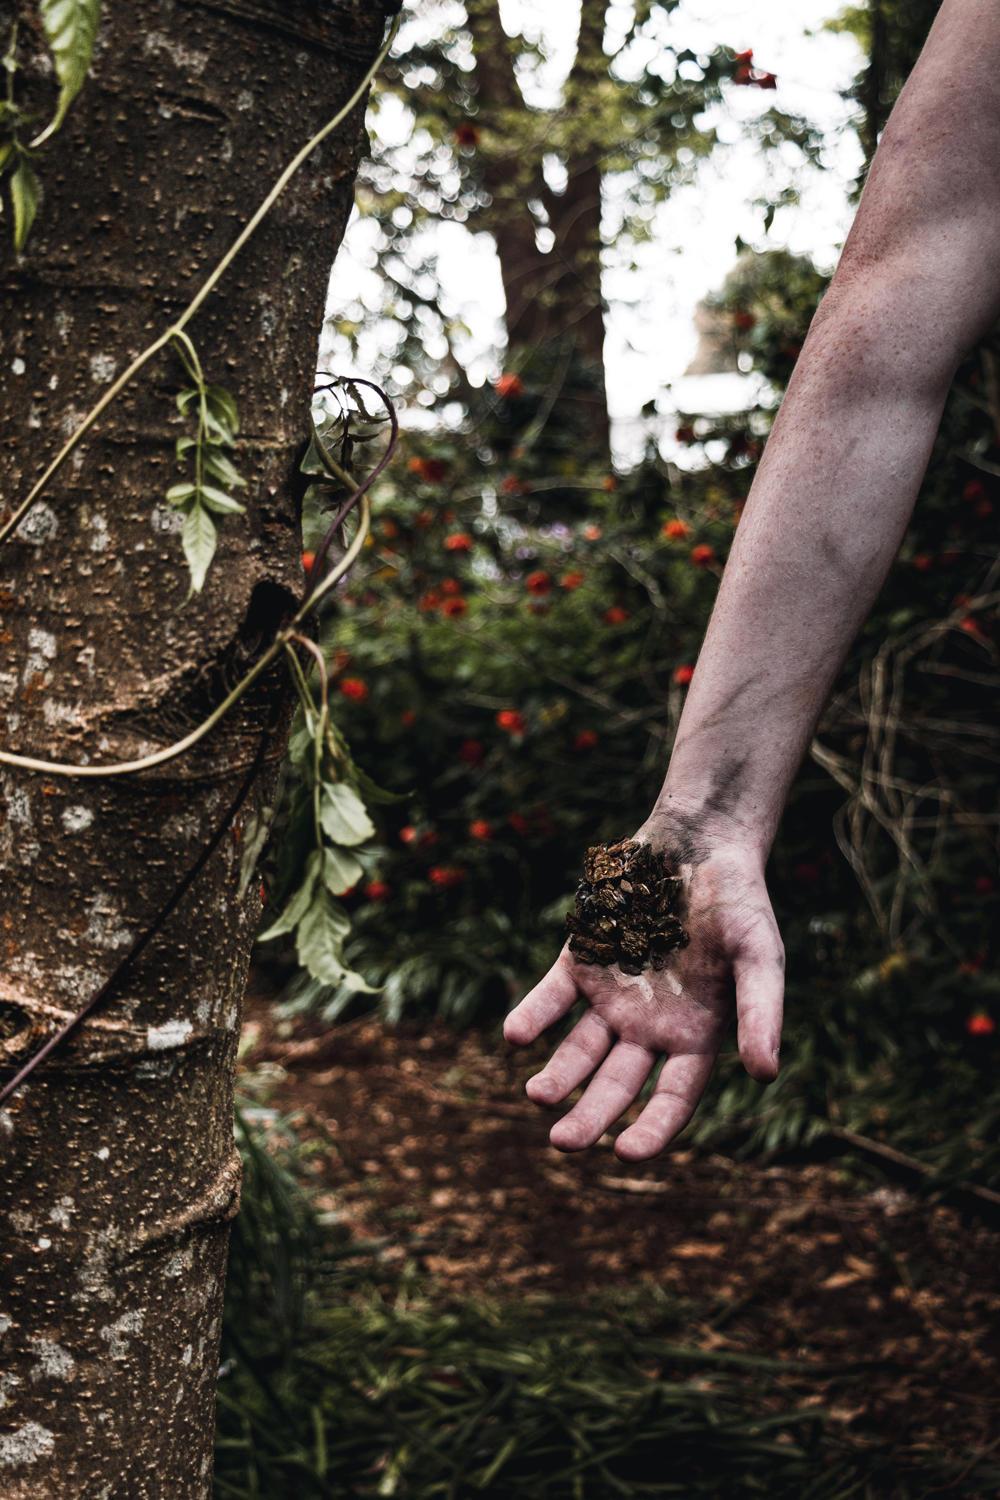 Colour photograph of a hand covered in dirt and tree bark, dangling in a forest scenery.